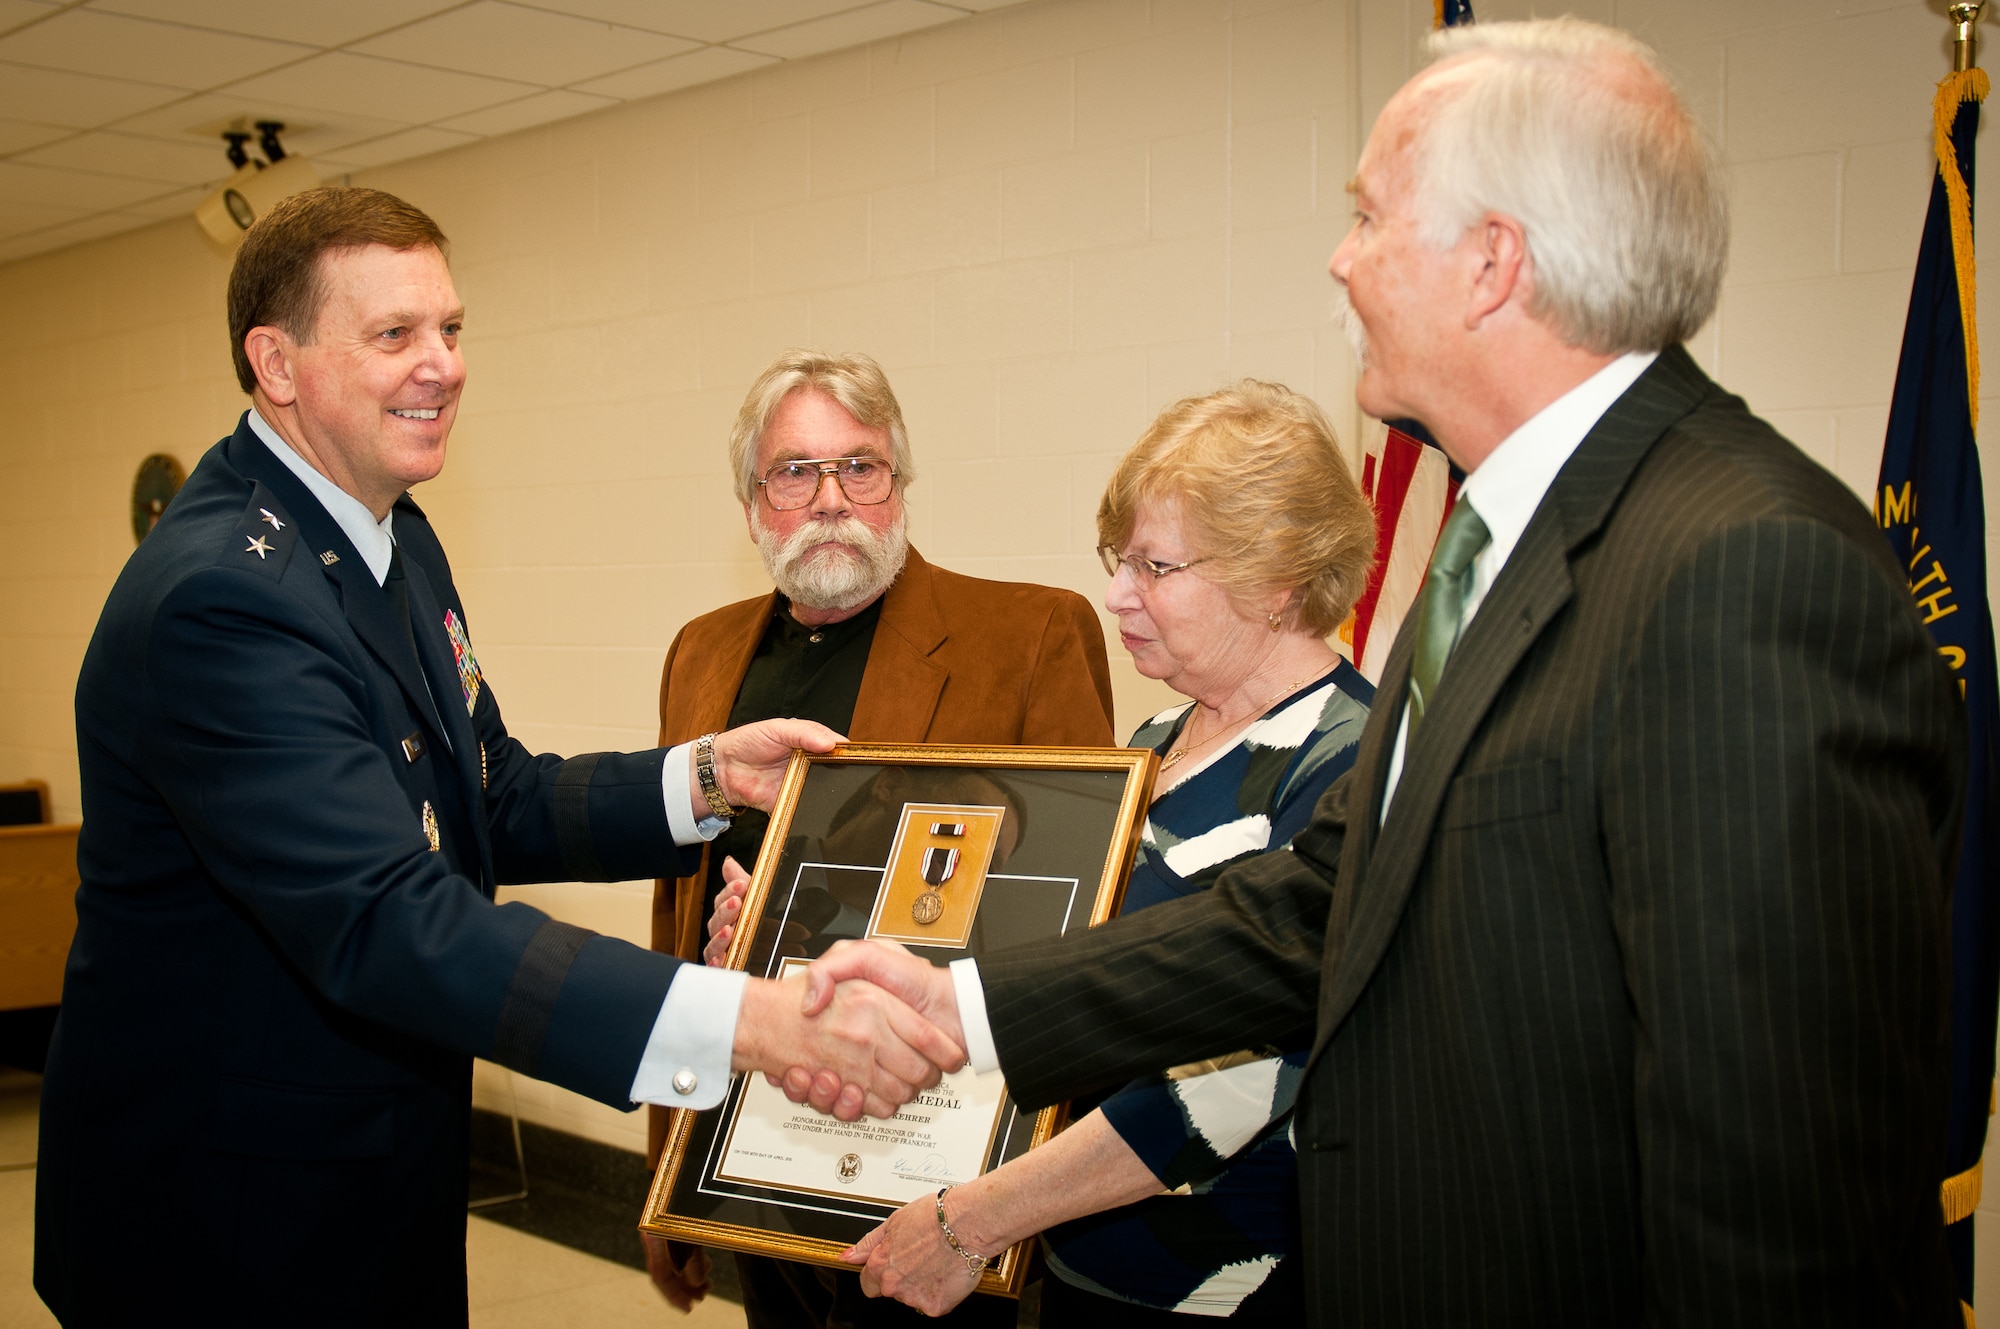 Maj. Gen. Edward W. Tonini, the Kentucky adjutant general, presents a posthumous Prisoner of War Medal to the sons and daughter of the late Capt. Merlin R. "Bob" Kehrer, a Kentucky Air National Guard pilot, during a ceremony April 16, 2011, at the Kentucky Air National Guard Base in Louisville, Ky.  Captain Kehrer was a young lieutenant and P-51 pilot in the U.S. Army Air Corps in World War II when his plane was shot down over enemy territory Feb. 24, 1944. He spent 13 months in a German prisoner of war camp. (U.S. Air Force photo/Tech. Sgt. Dennis Flora)